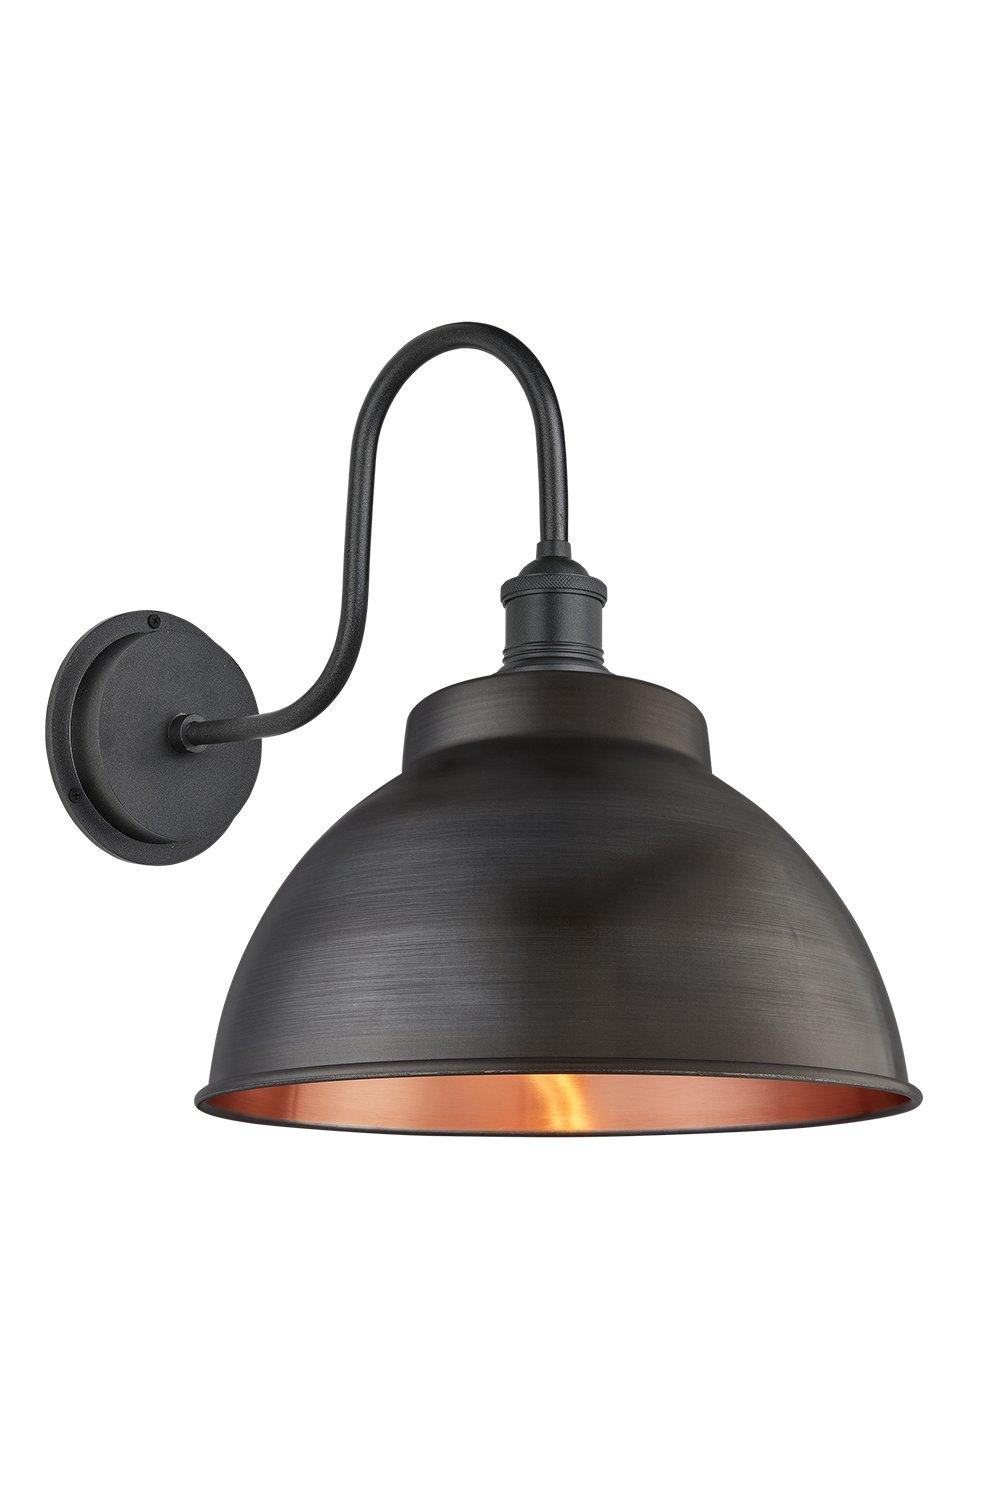 Swan Neck Outdoor & Bathroom Dome Wall Light, 13 Inch, Pewter & Copper, Pewter Holder